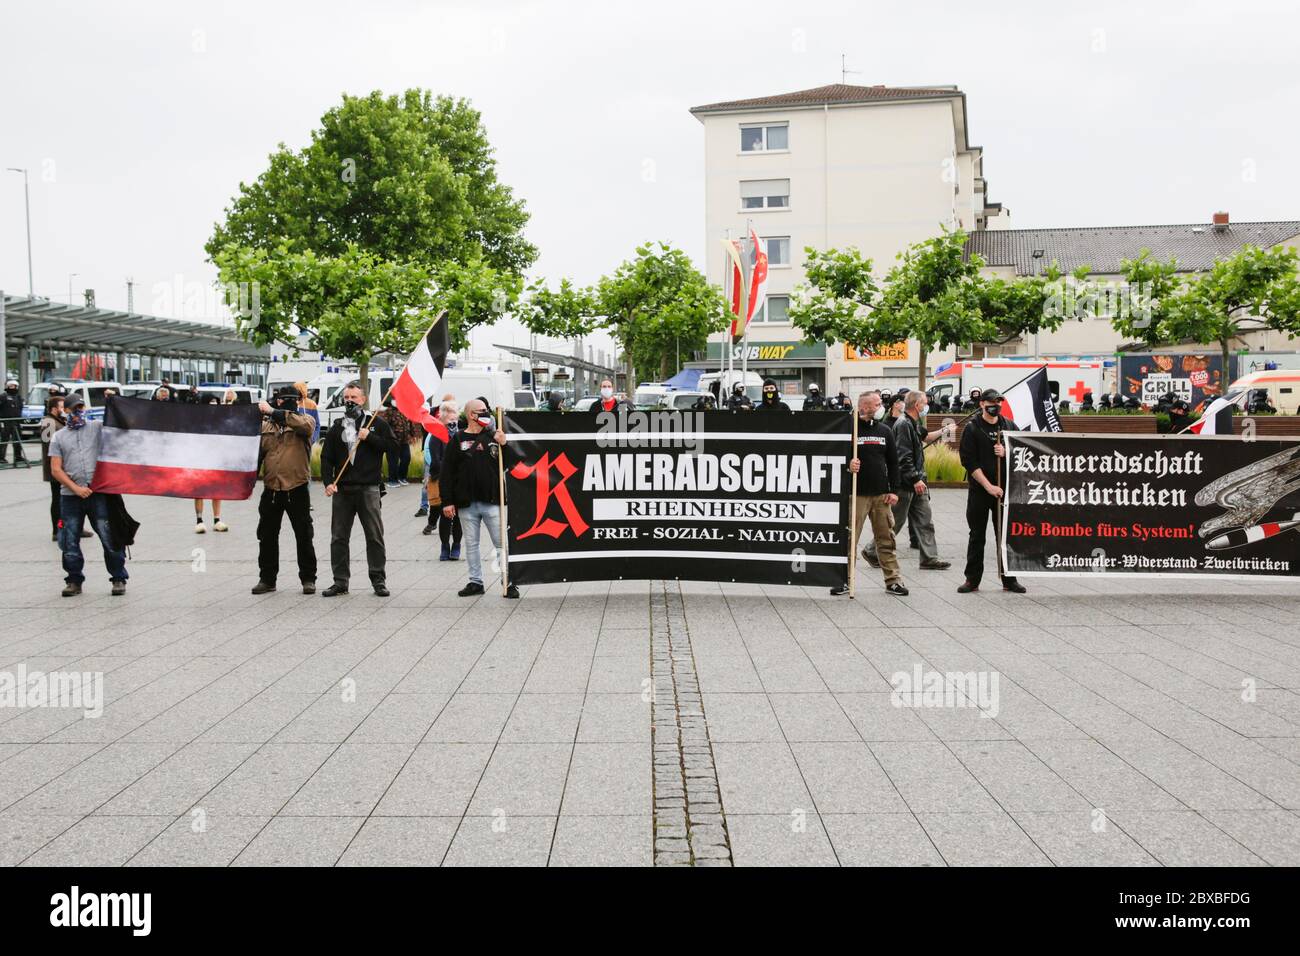 Worms, Germany. 6th June 2020. The right-wing protesters stand with flags and banners at the closing rally. Around 50 right-wing protesters marched through the city centre of Worms for the 12. and last 'Day of the German Future’. The march was cut short due to several hundred counter protesters who blocked the  path of the right-wing march. The march was a yearly right-wing event in different German city that drew over 1000 protesters at its high-point. Stock Photo